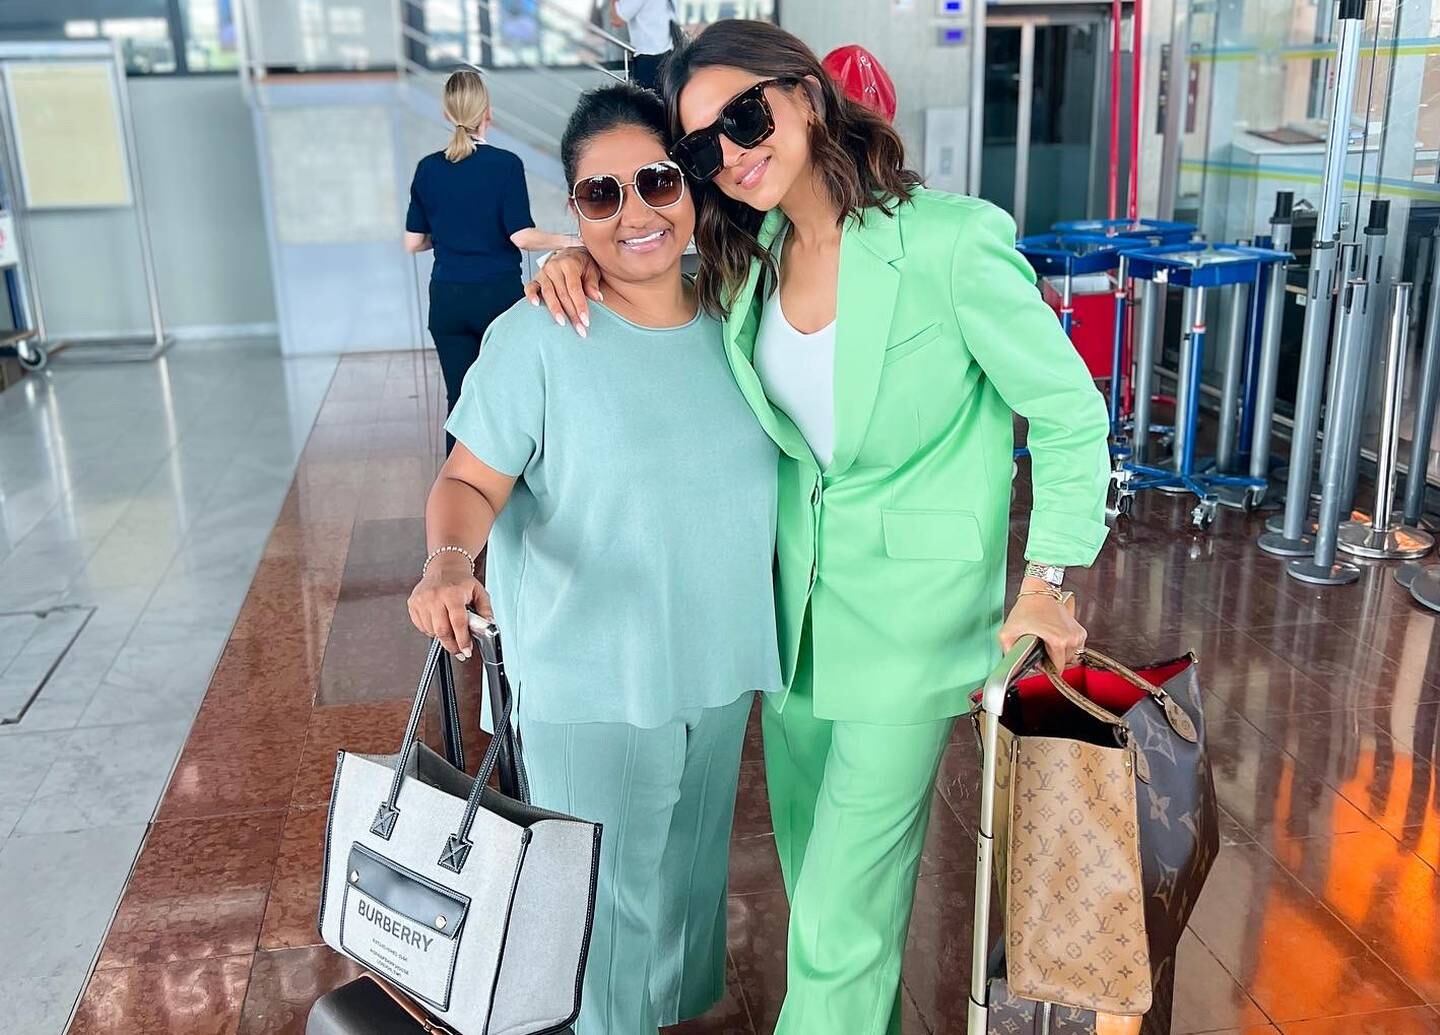 Dolly Jain, left, with Deepika Padukone, one of her favourite celebrity clients. Photo: Dolly Jain